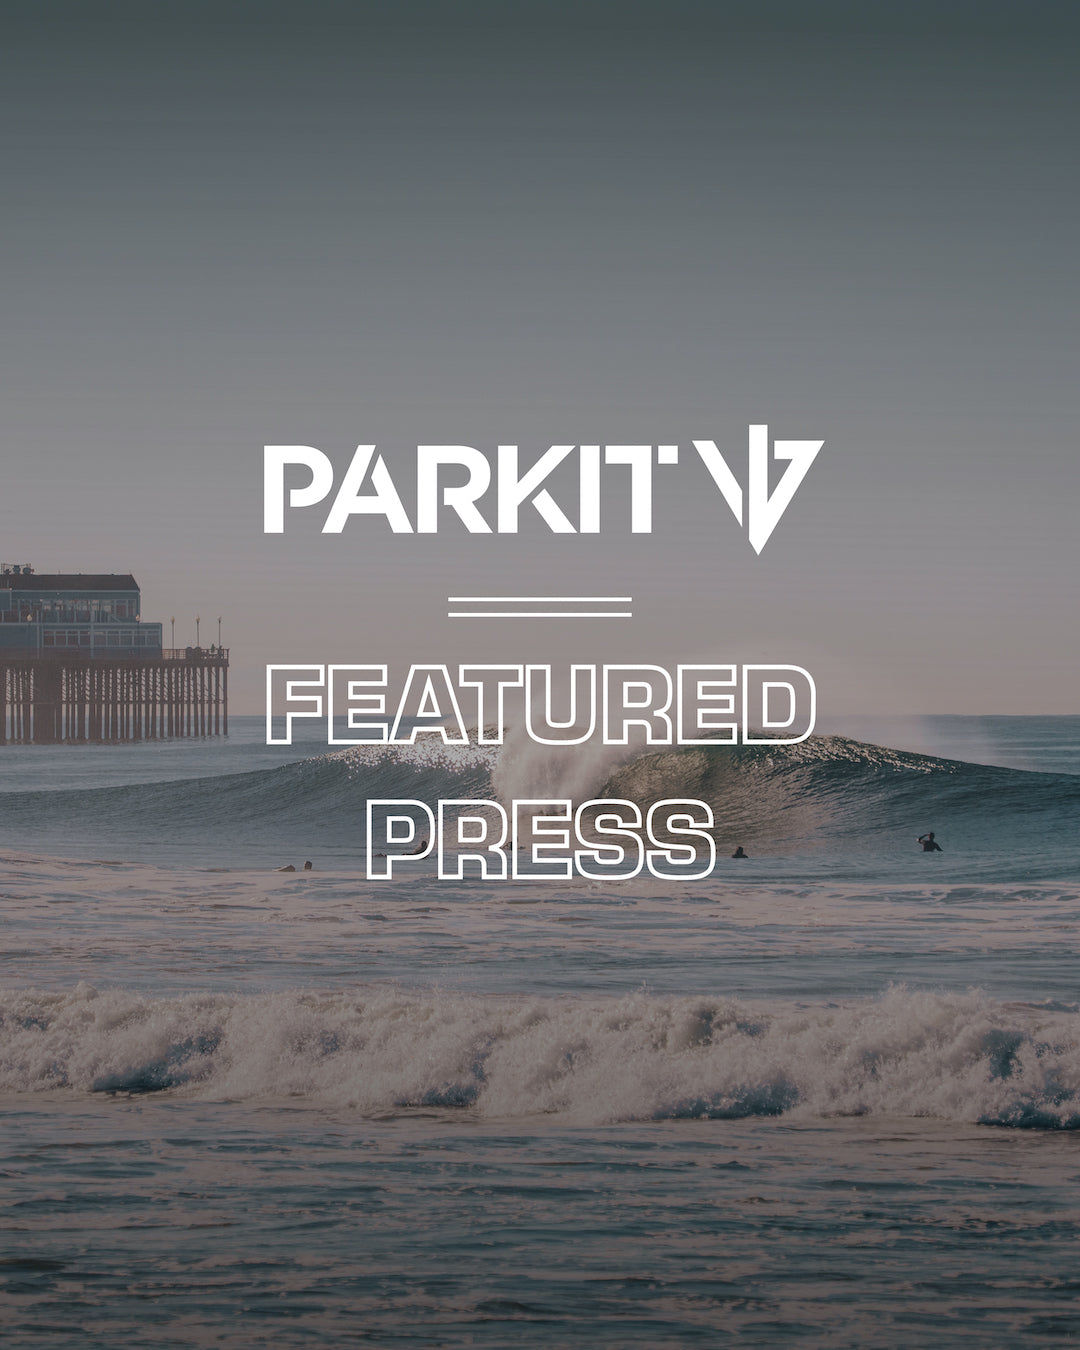 PARKIT PRESS with a breaking wave in Oceanside California, the town where PARKIT was foudned